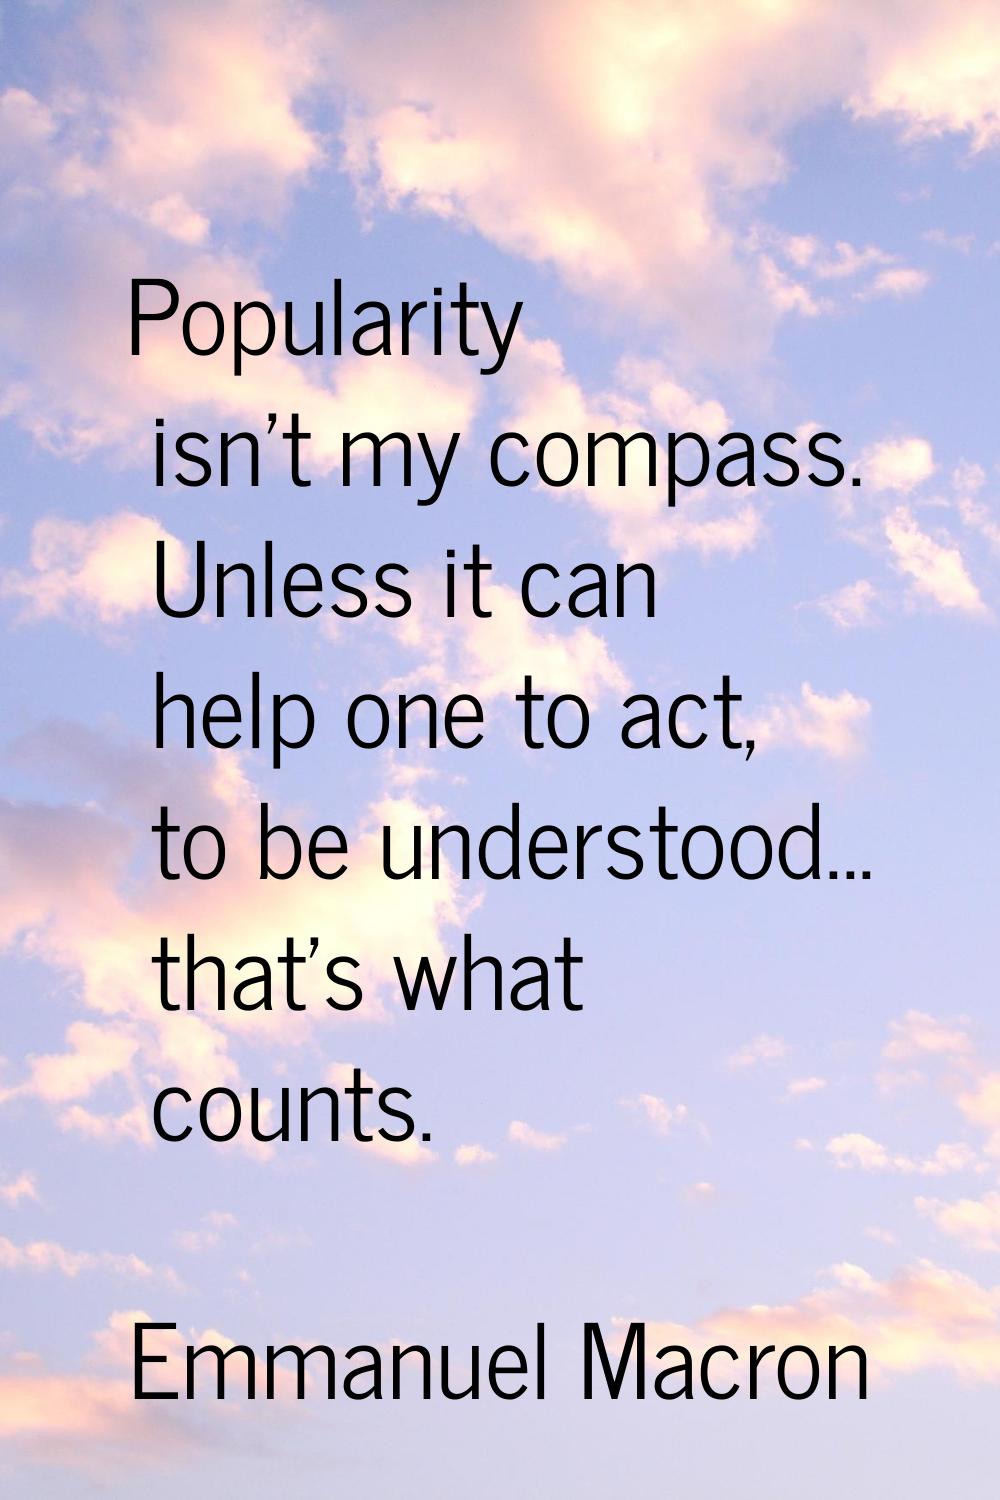 Popularity isn't my compass. Unless it can help one to act, to be understood... that's what counts.